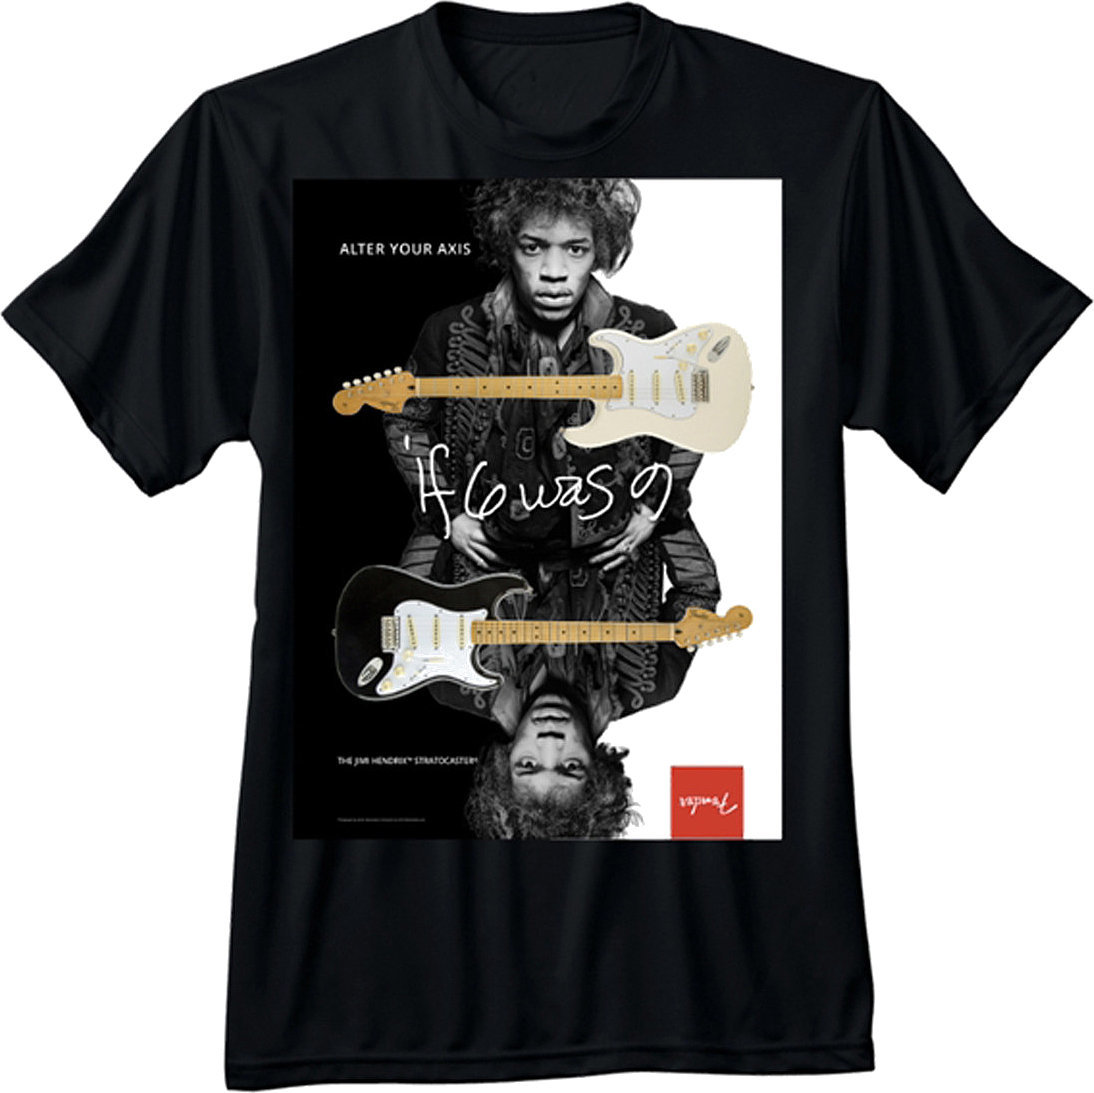 Skjorte Fender Jimi Hendrix Collection Alter Your Axis T-Shirt Black M